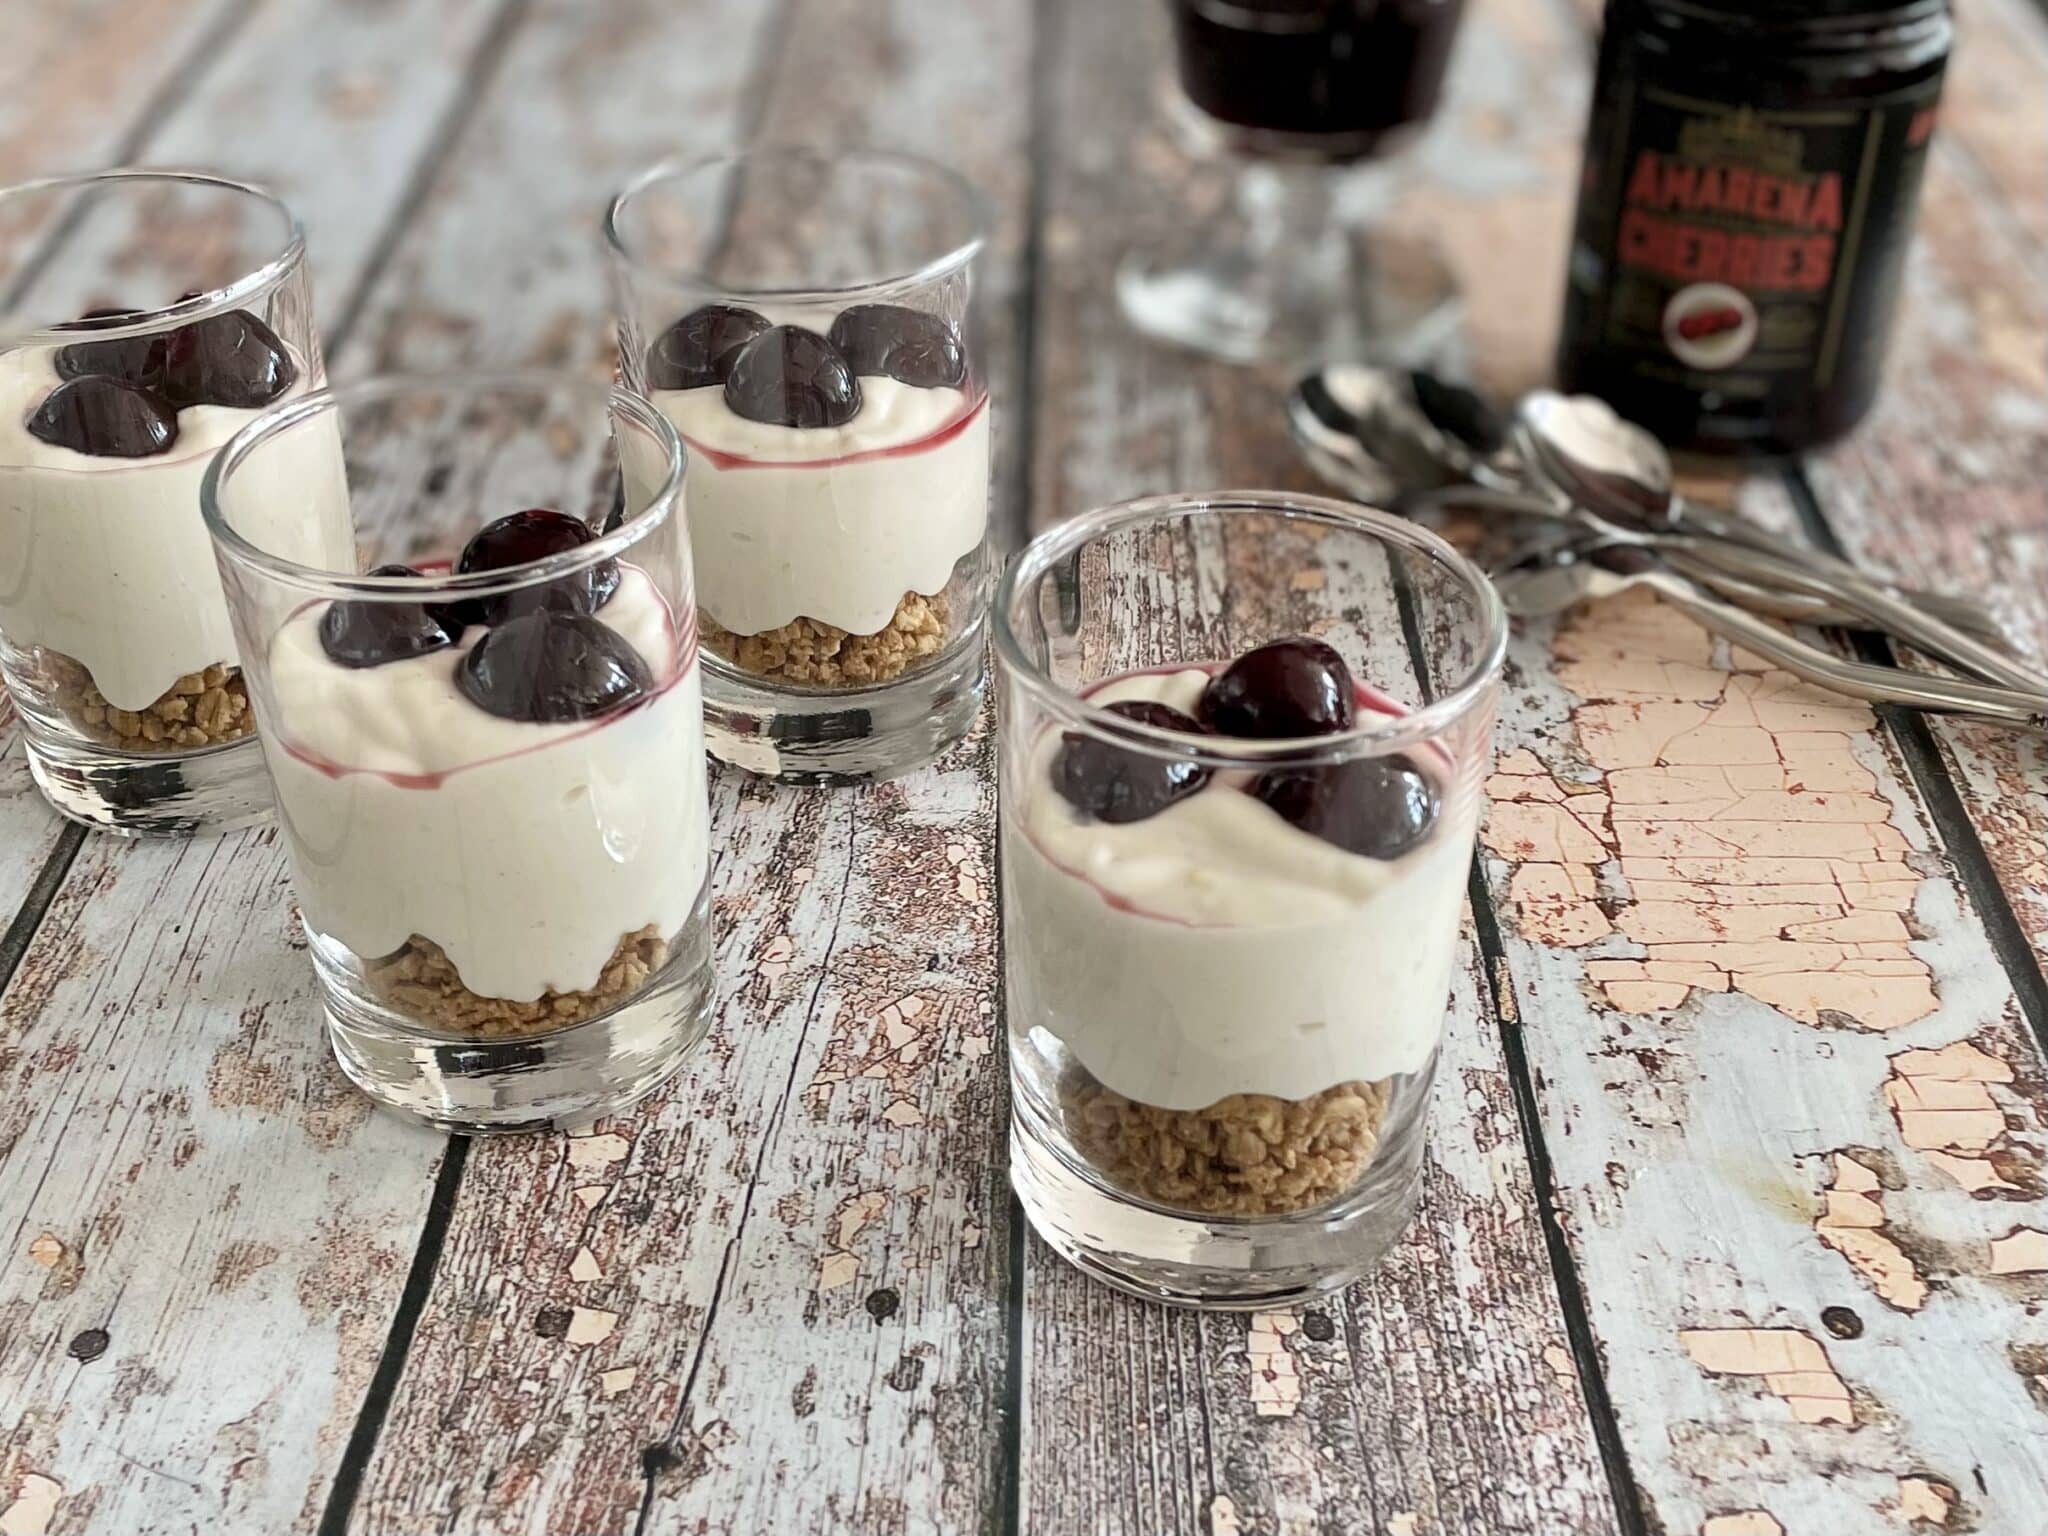 no bake cherry cheesecake in small jars with product amarena-style cherries on wood texture with spoons